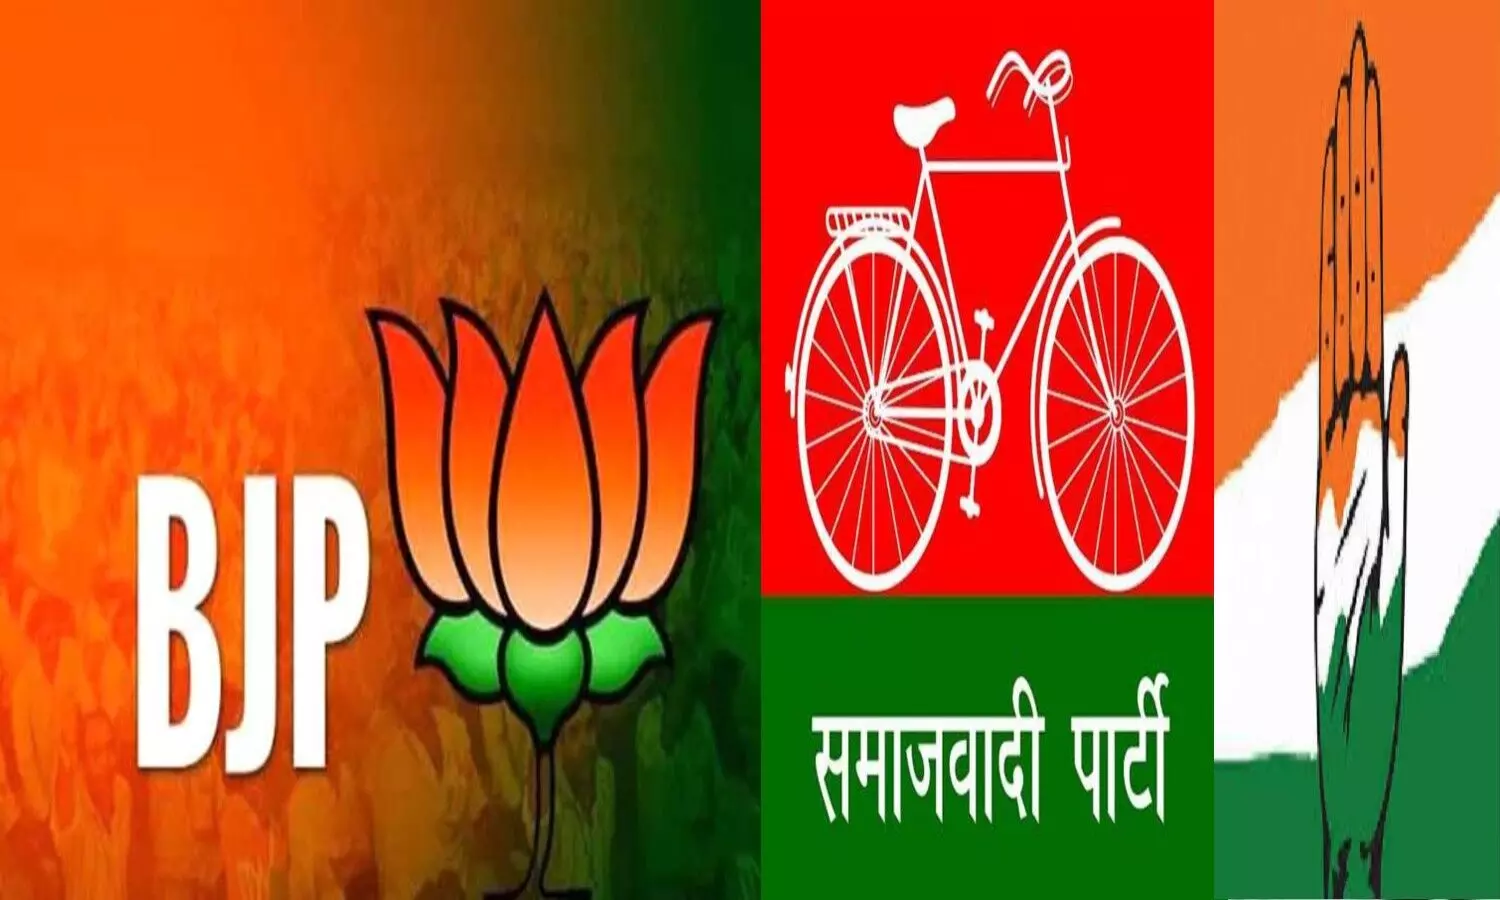 Today 44 candidates supported by BJP and party have waved the flag of victory.